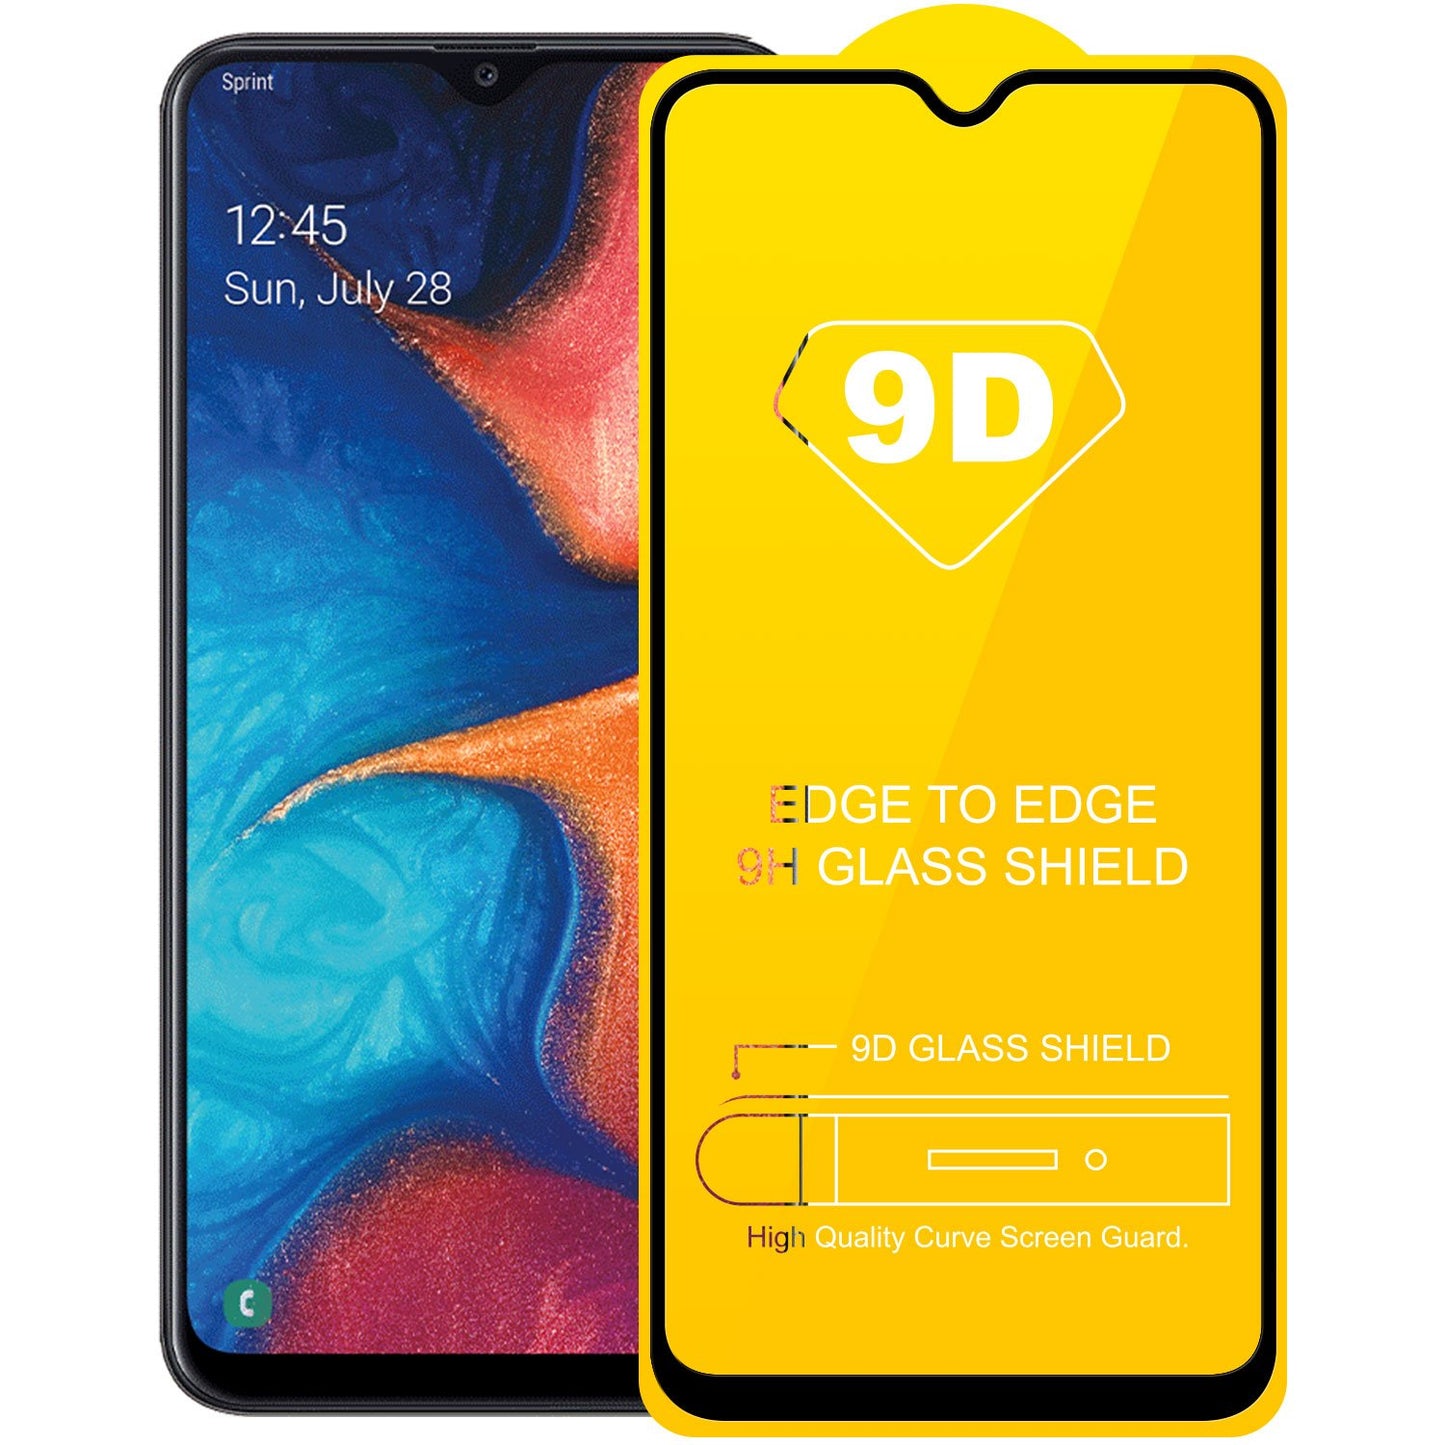 SGSAMA20 - Samsung Galaxy A20, Premium 3D Full Coverage Tempered Glass Screen Protector for Samsung Galaxy A20 by Cellet